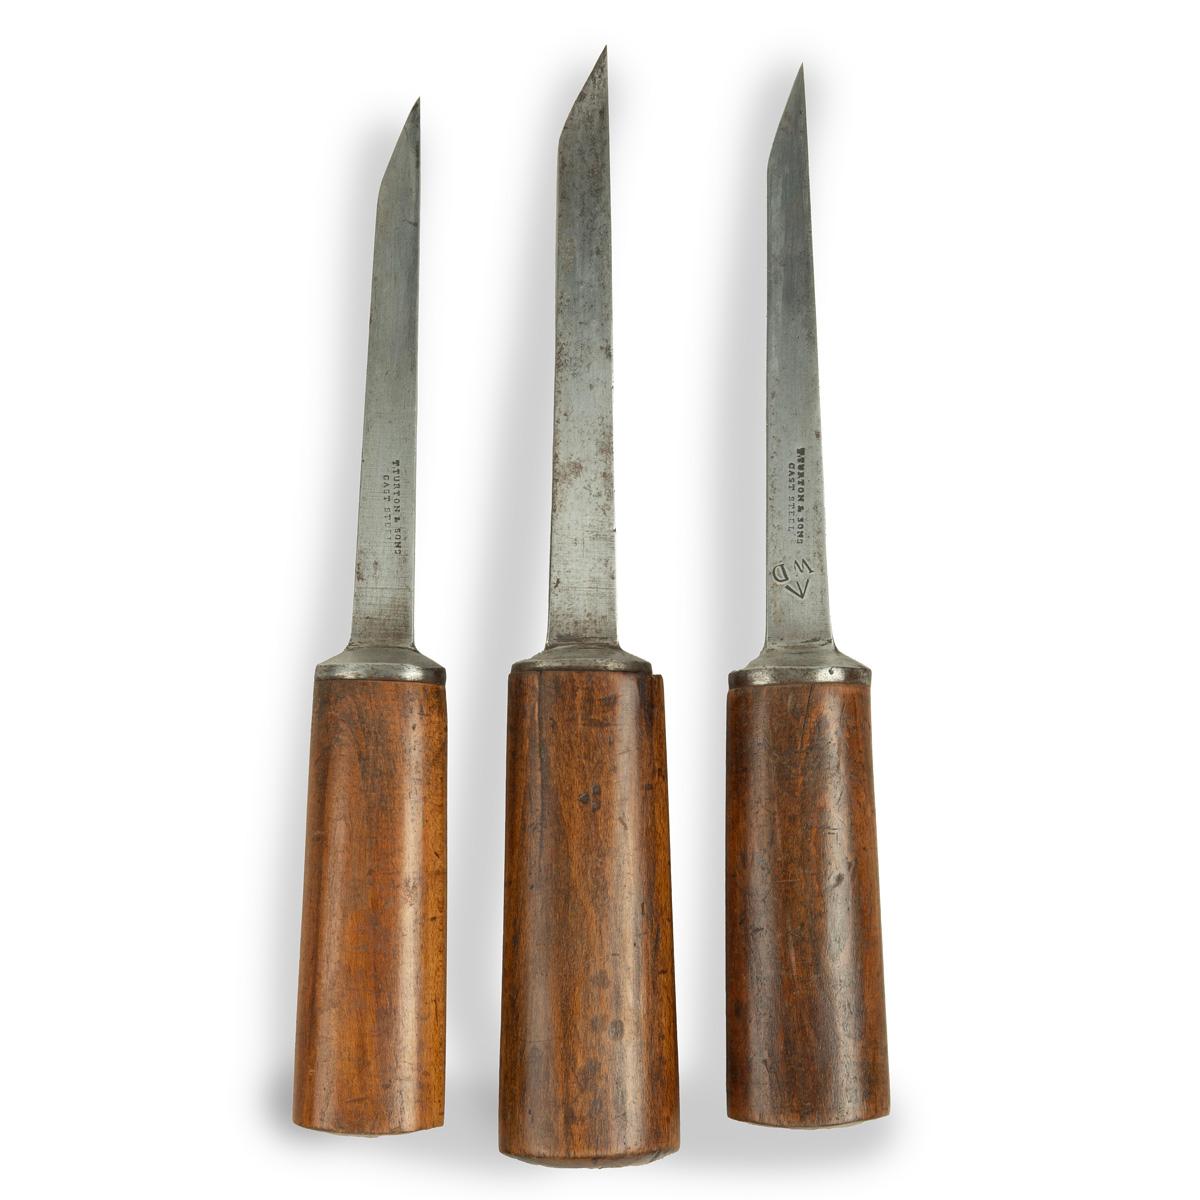 English Three mortice chisels, all with sturdy ash handles by Sorby & Co For Sale